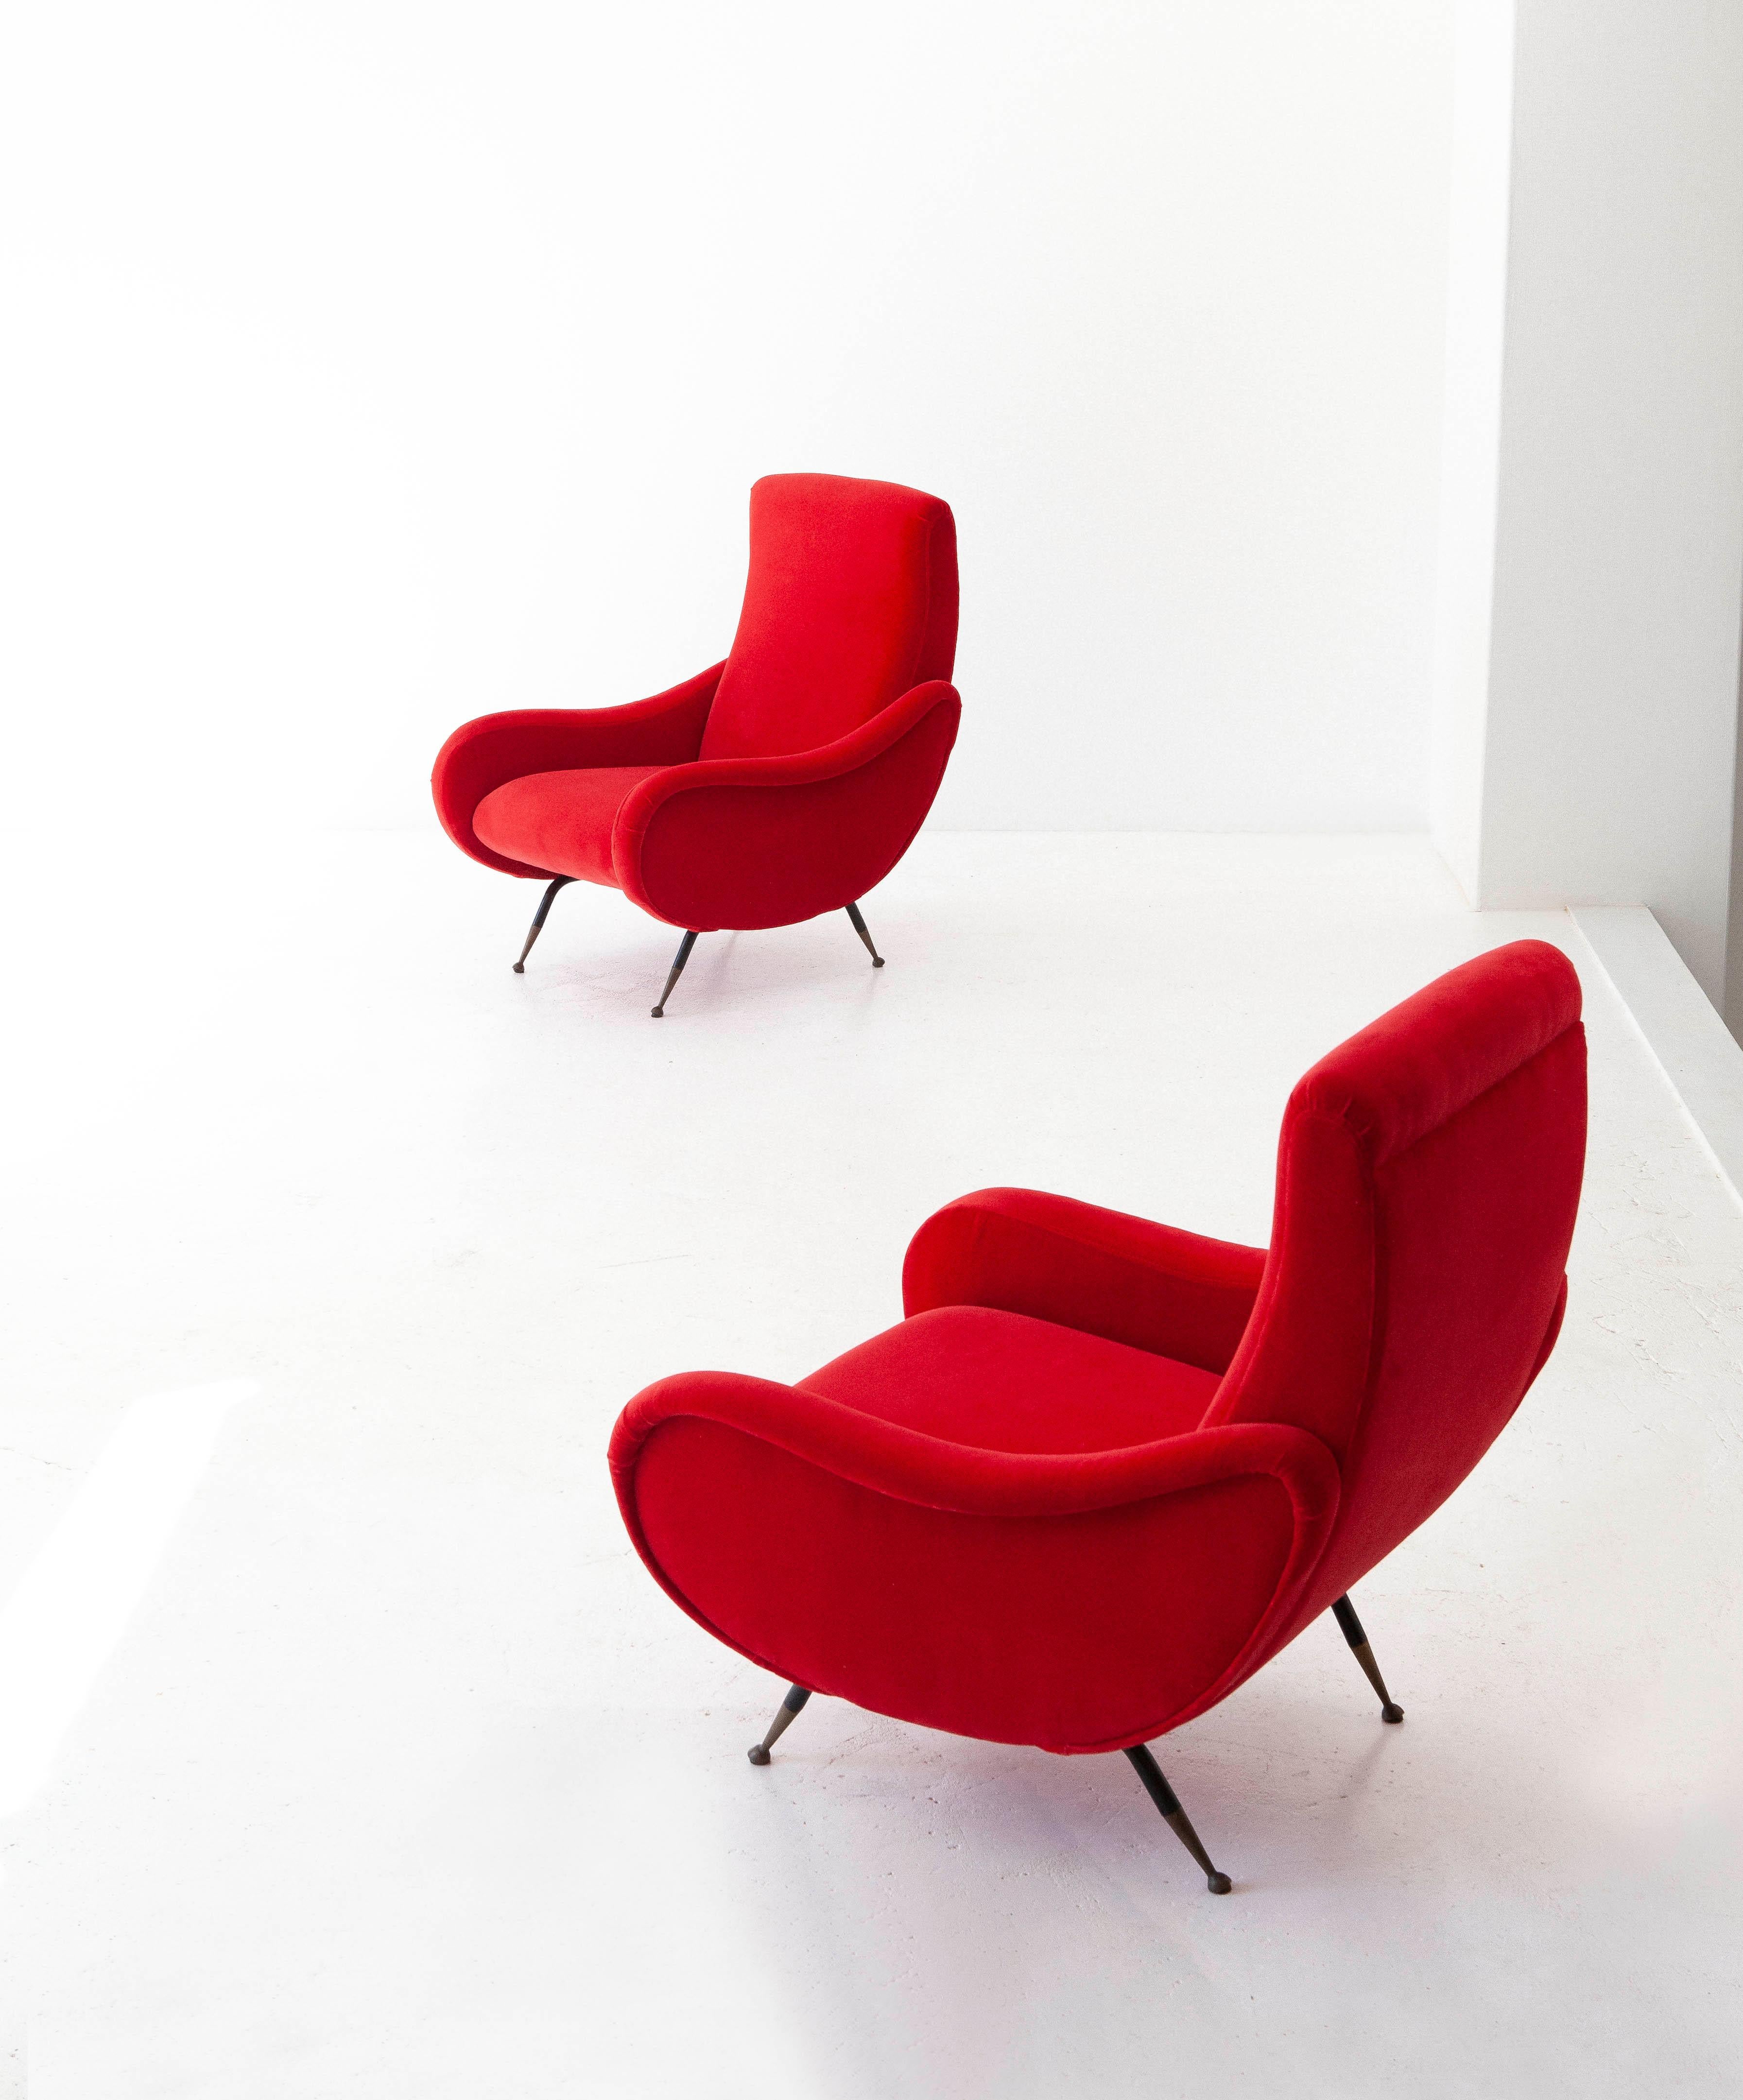 Pair of lounge chairs, Italy, 1950s
These easy chairs with armrests has a black enameled iron frame with brass socks
Fully restored:
new red cotton velvet upholstery and padding
The legs have been painted, only the brass has original patina (a